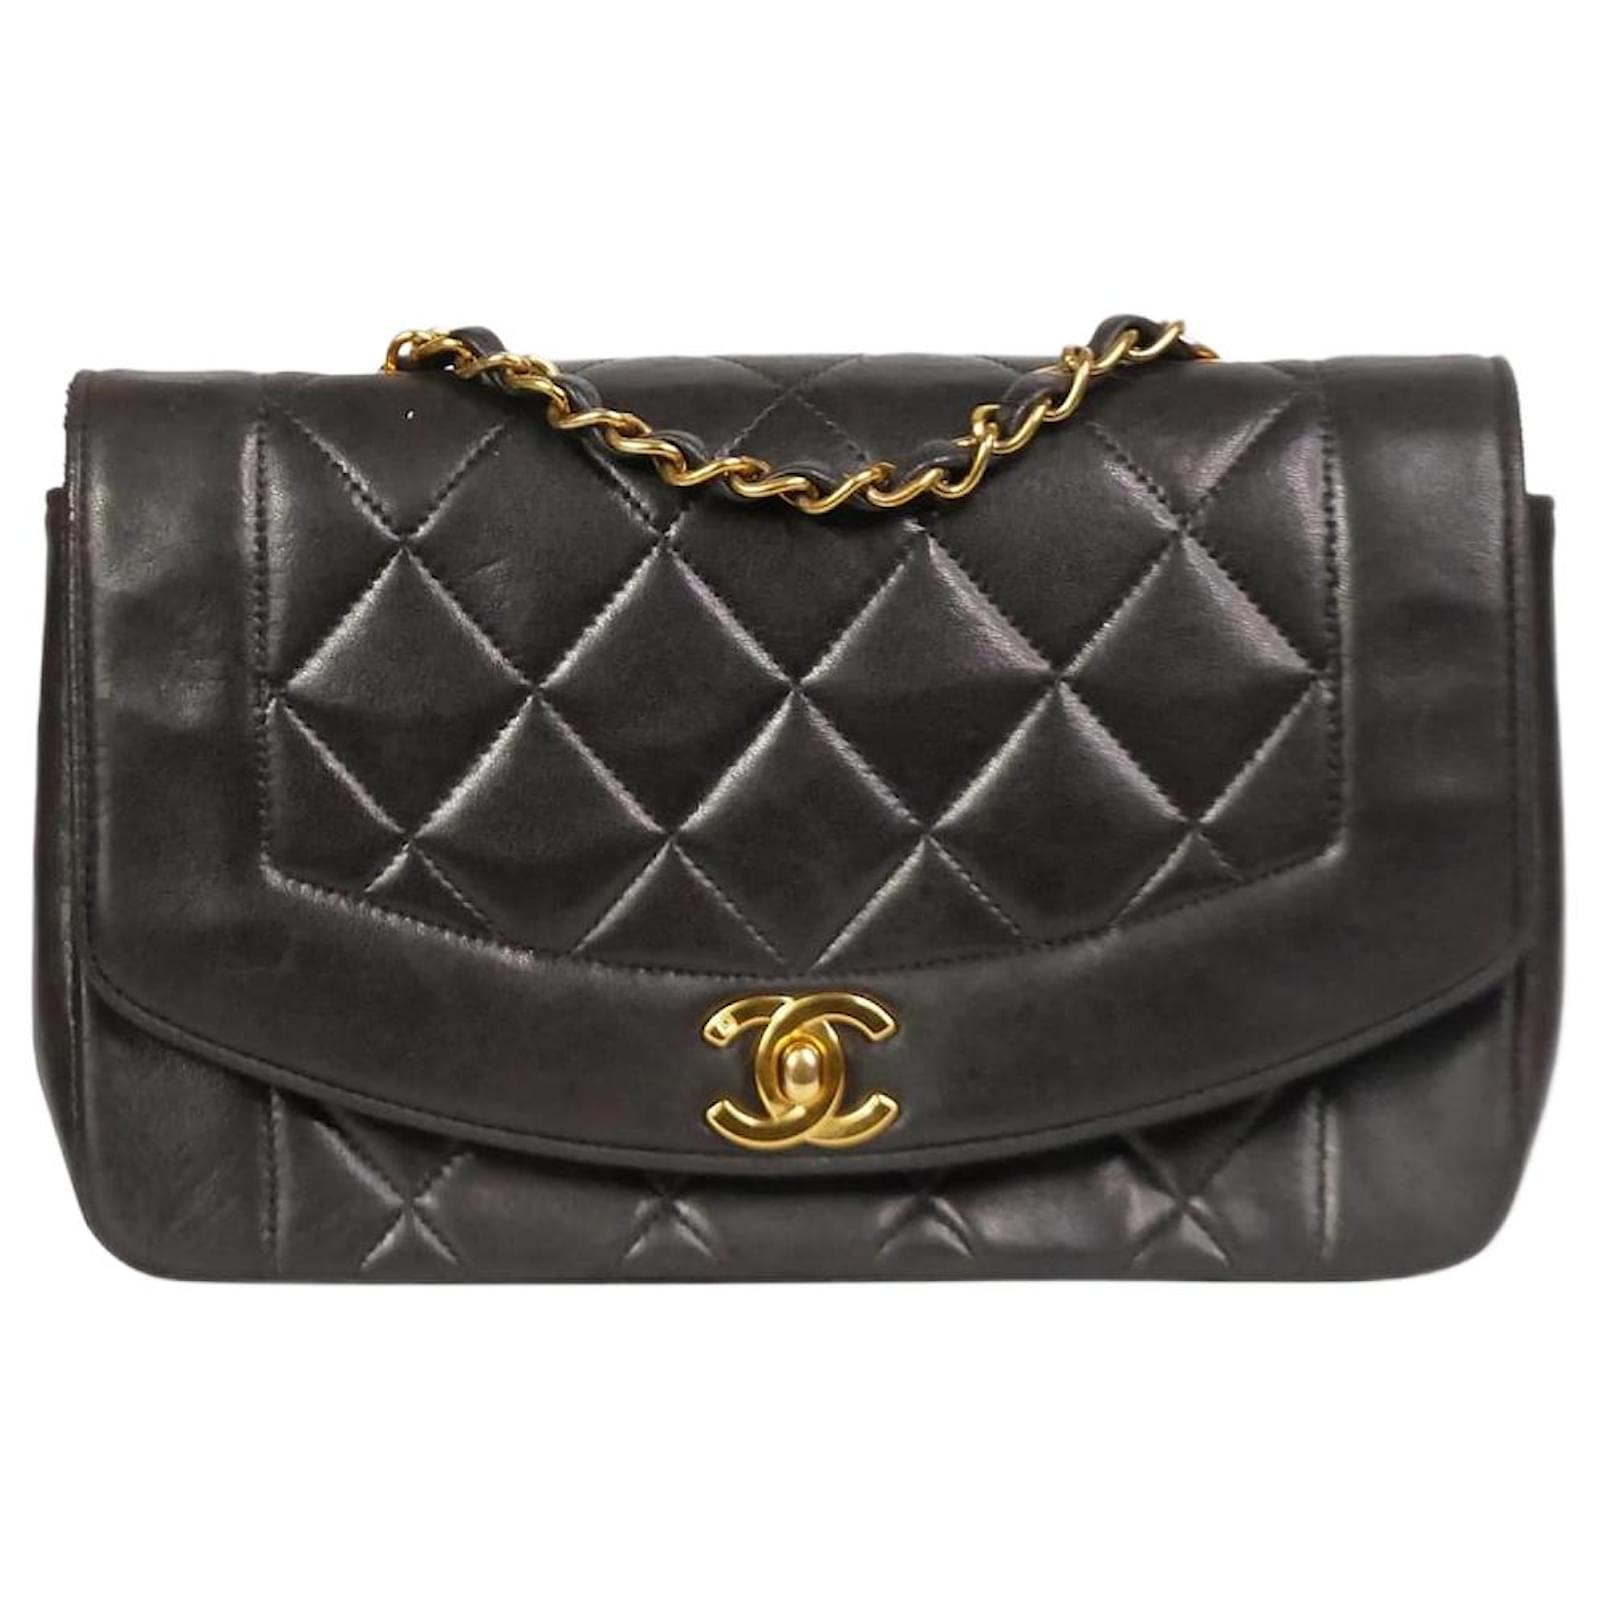 Chanel Black leather small vintage 1994-1996 Diana gold hardware